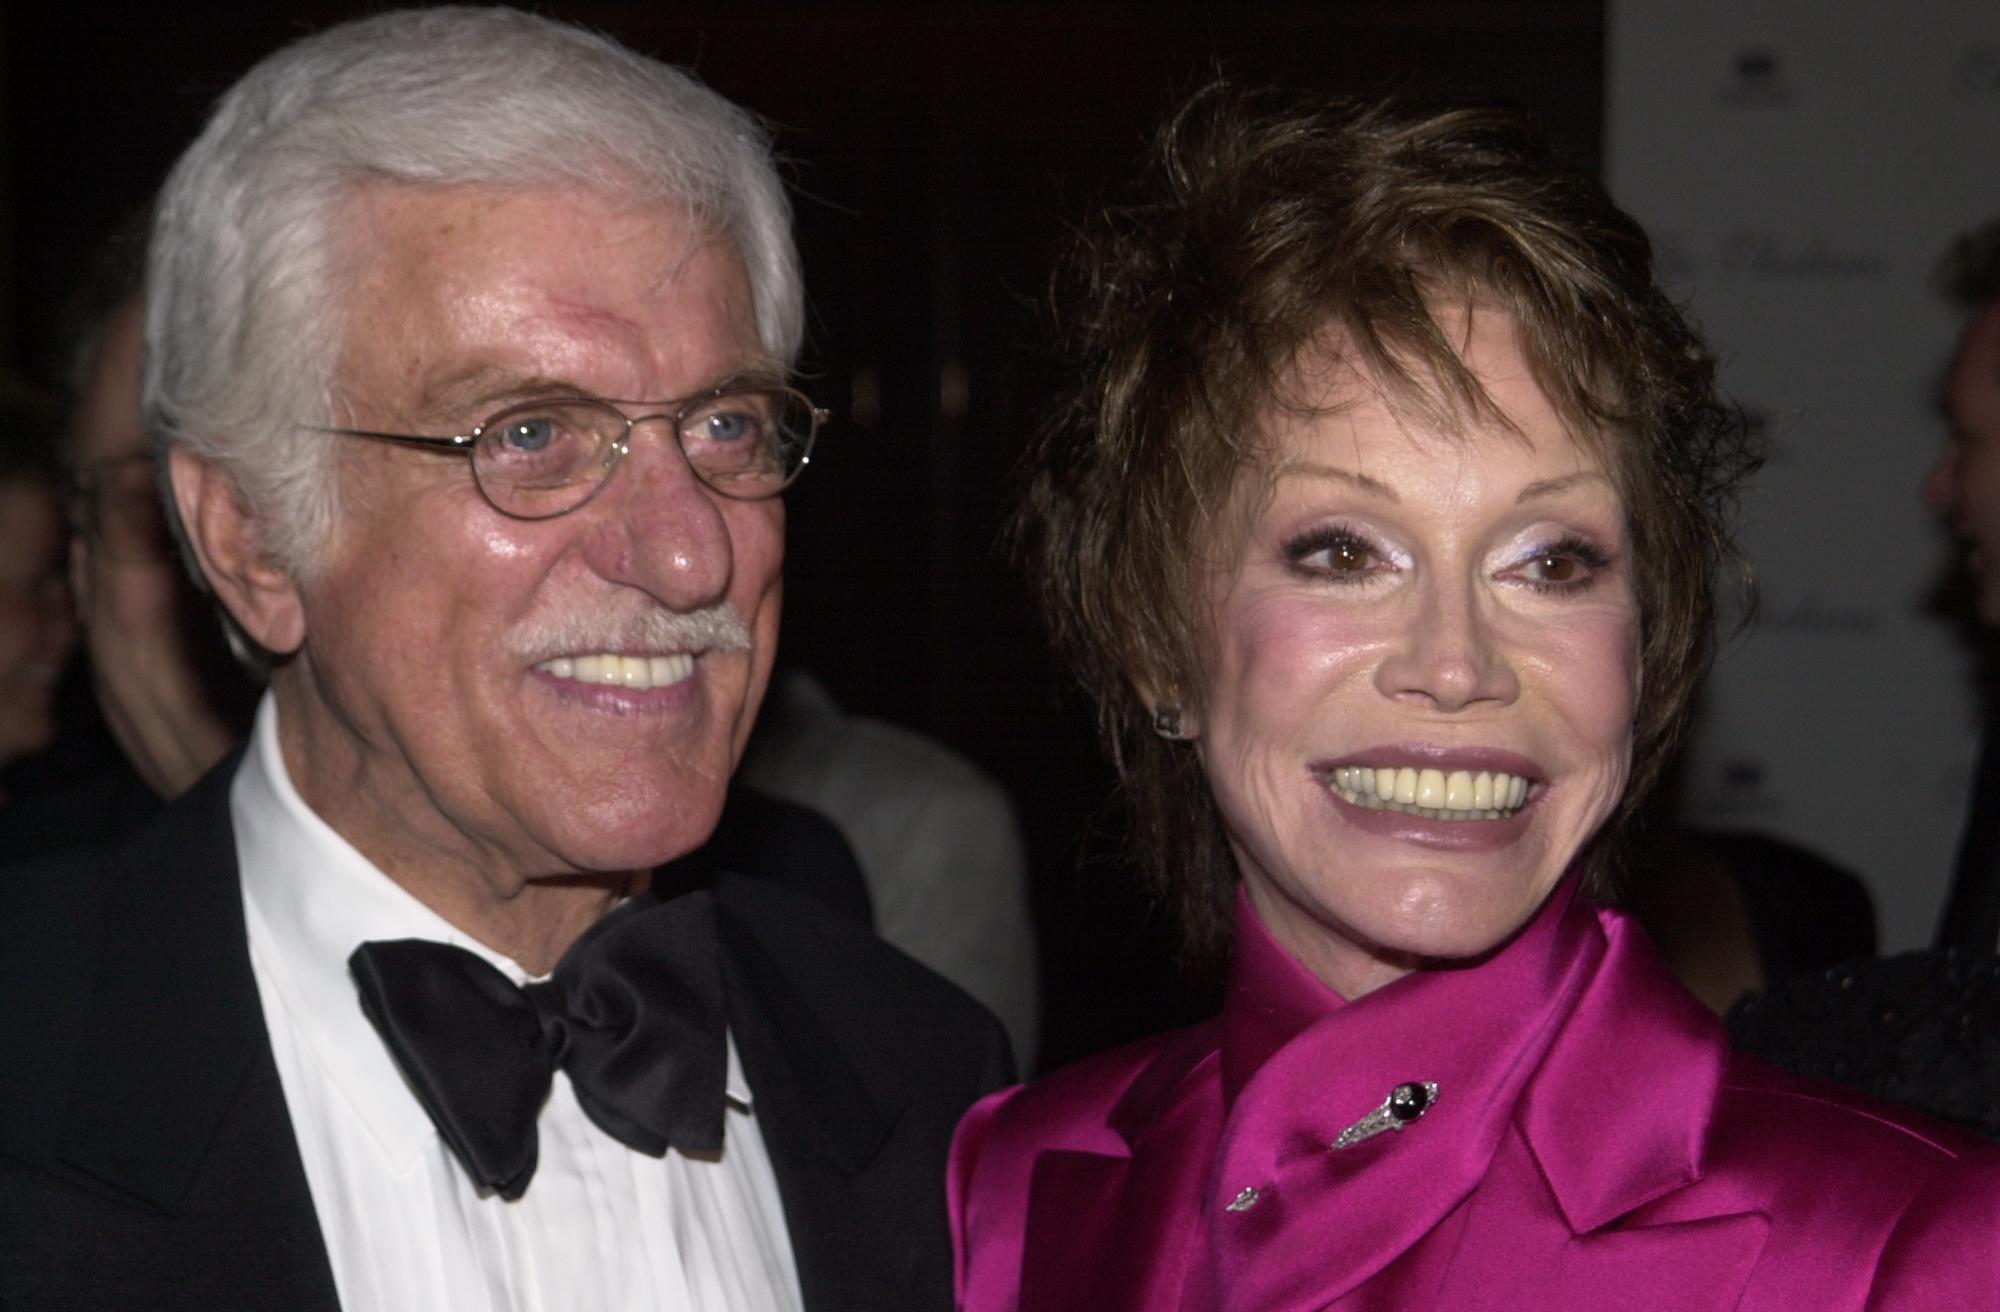 Dick Van Dyke and Mary Tyler Moore on October 7, 2000 in Century City, California | Photo: Getty Images